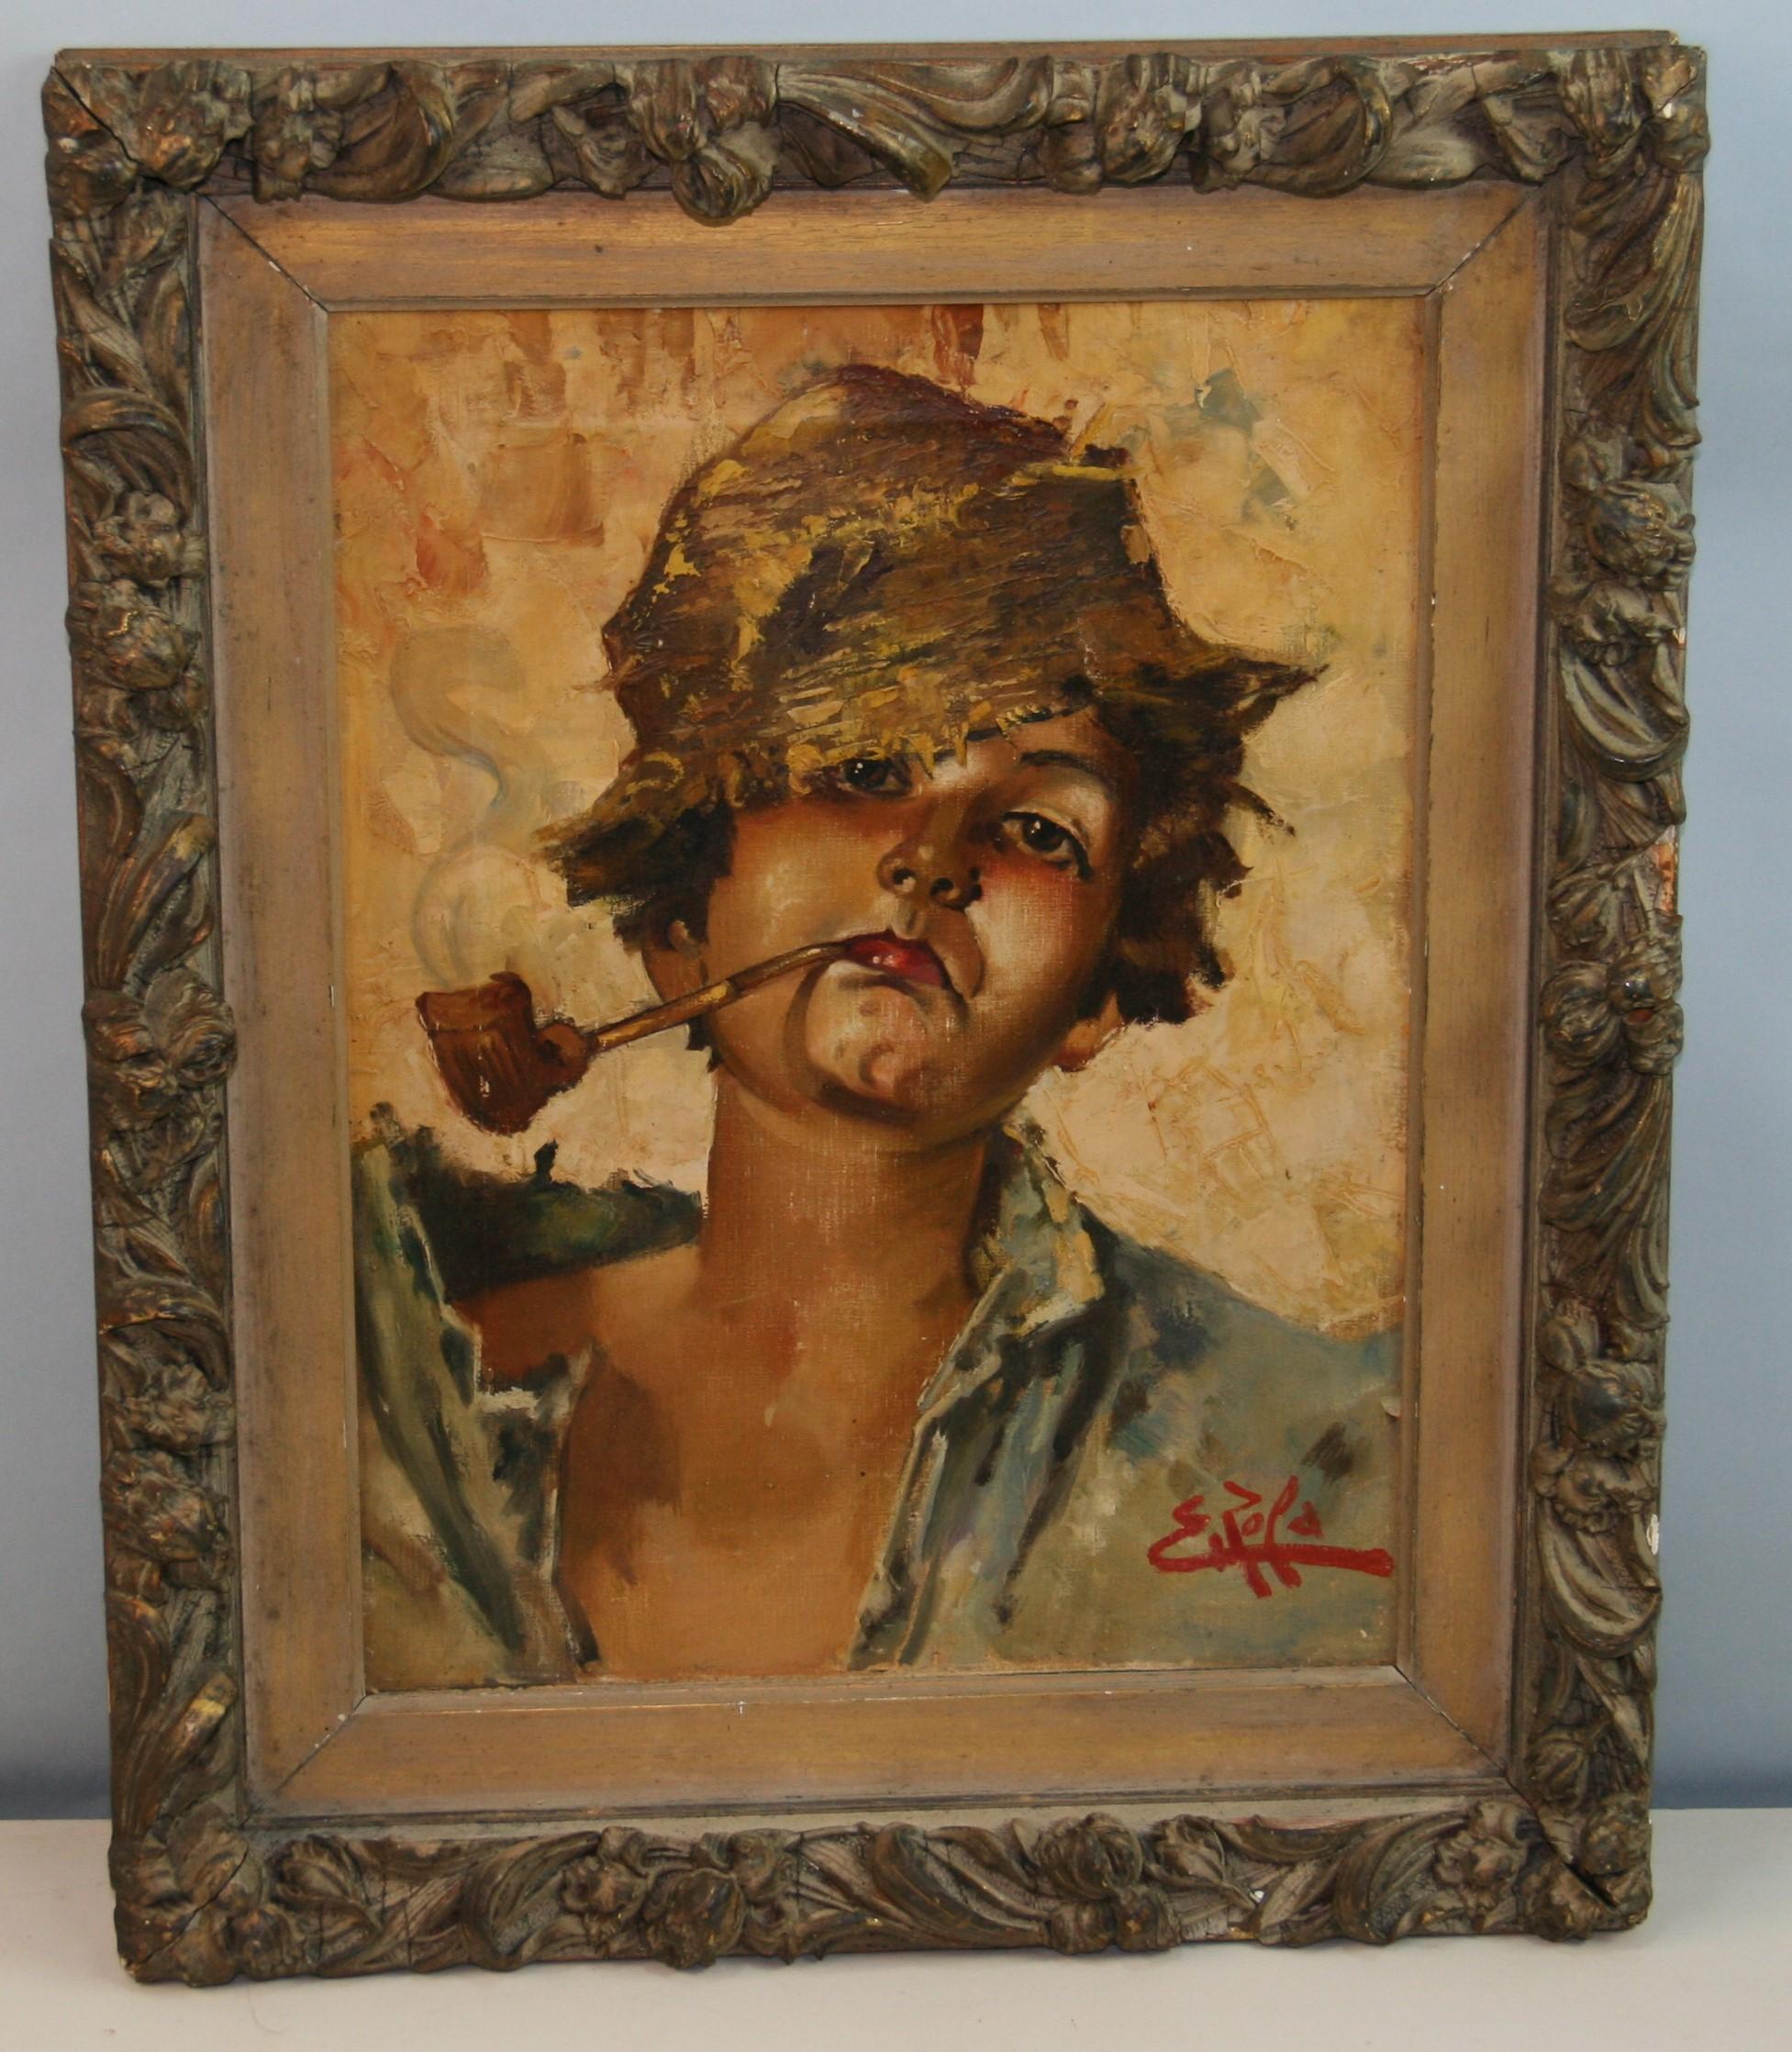 4027 Oil on canvas set in a period frame of a young boy smoking a pipe
Signe E.Pofa
Image size 11.5x16